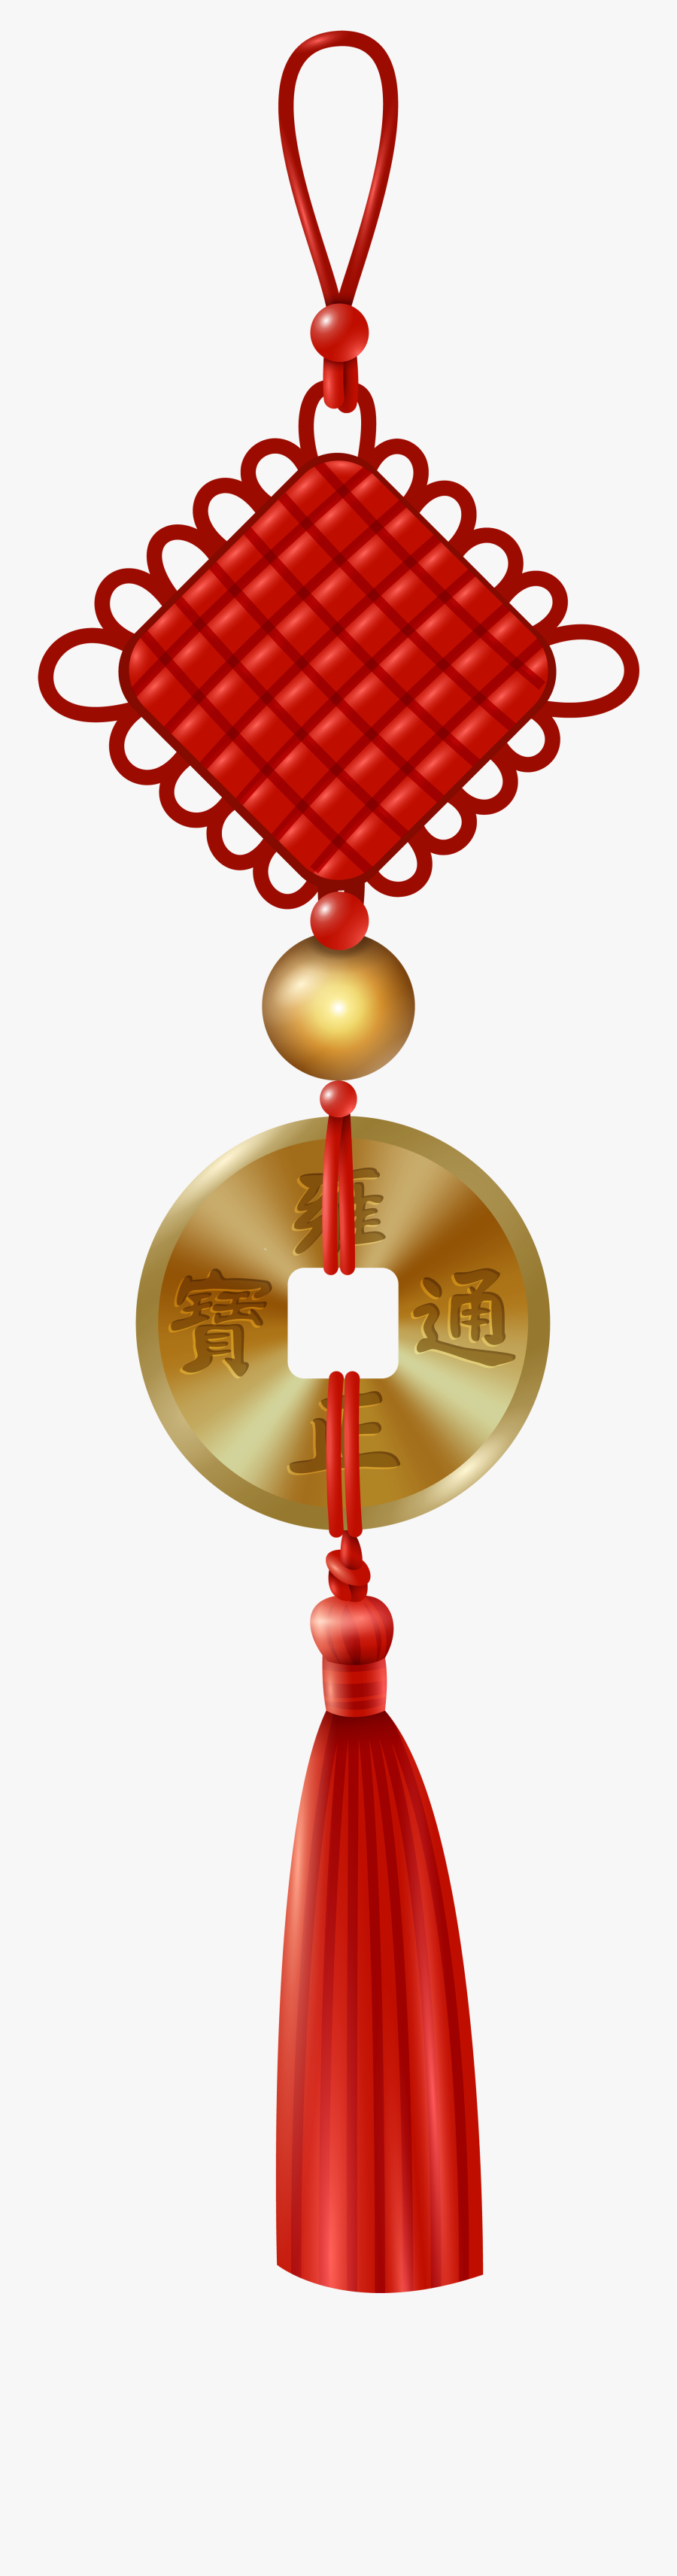 Chinese Hanging Decor Png Clip Art - Chinese Hanging Ornaments Png, Transparent Clipart